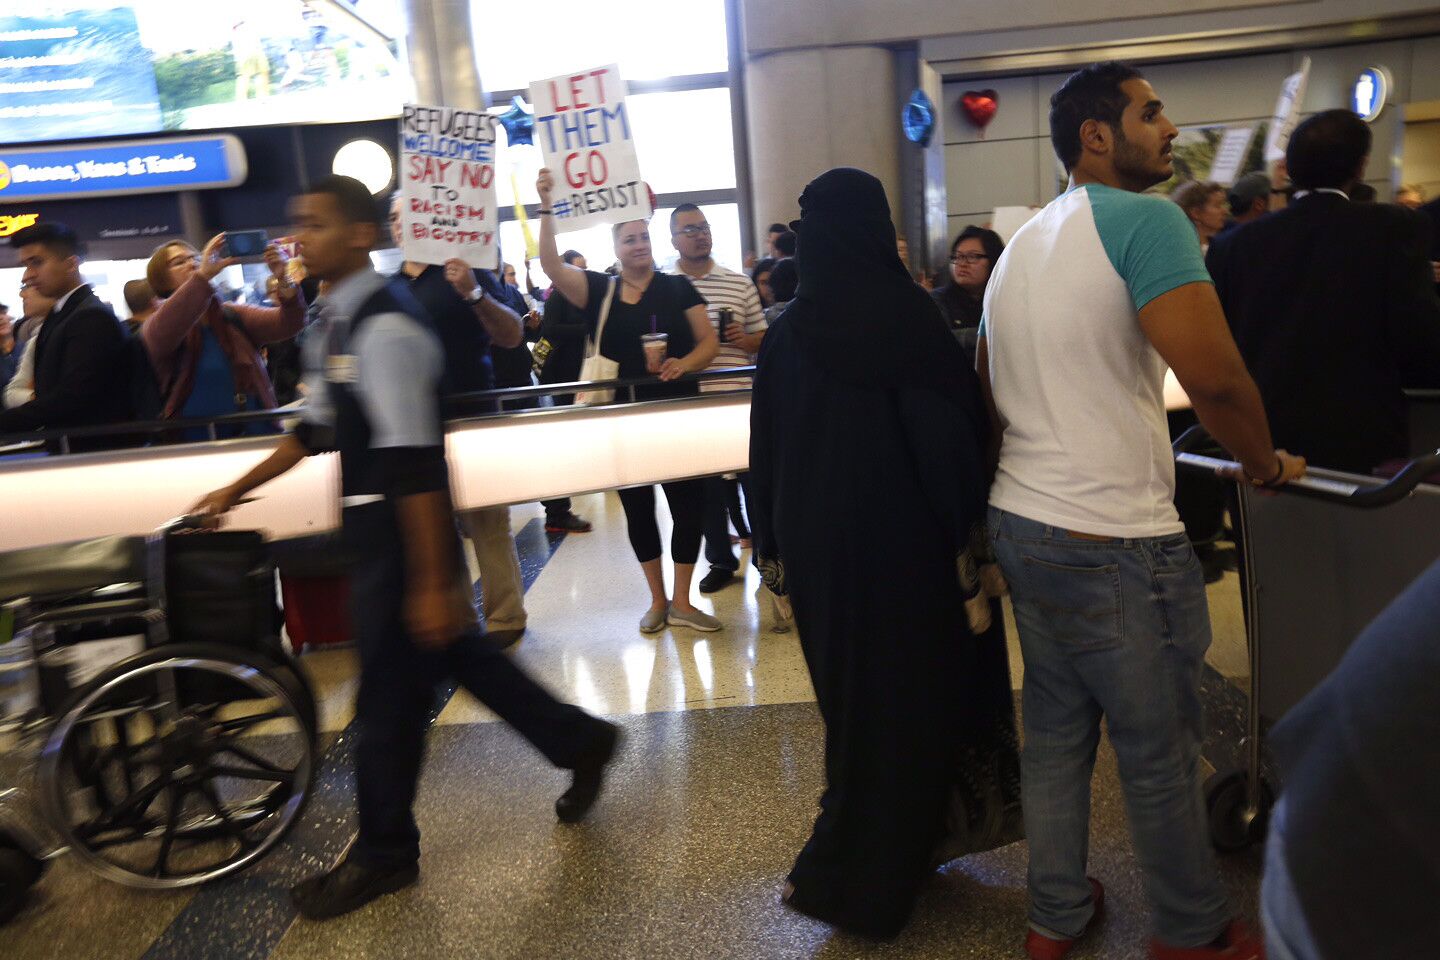 Passengers arrive at LAX as protests continue Sunday over President Trump's travel ban.